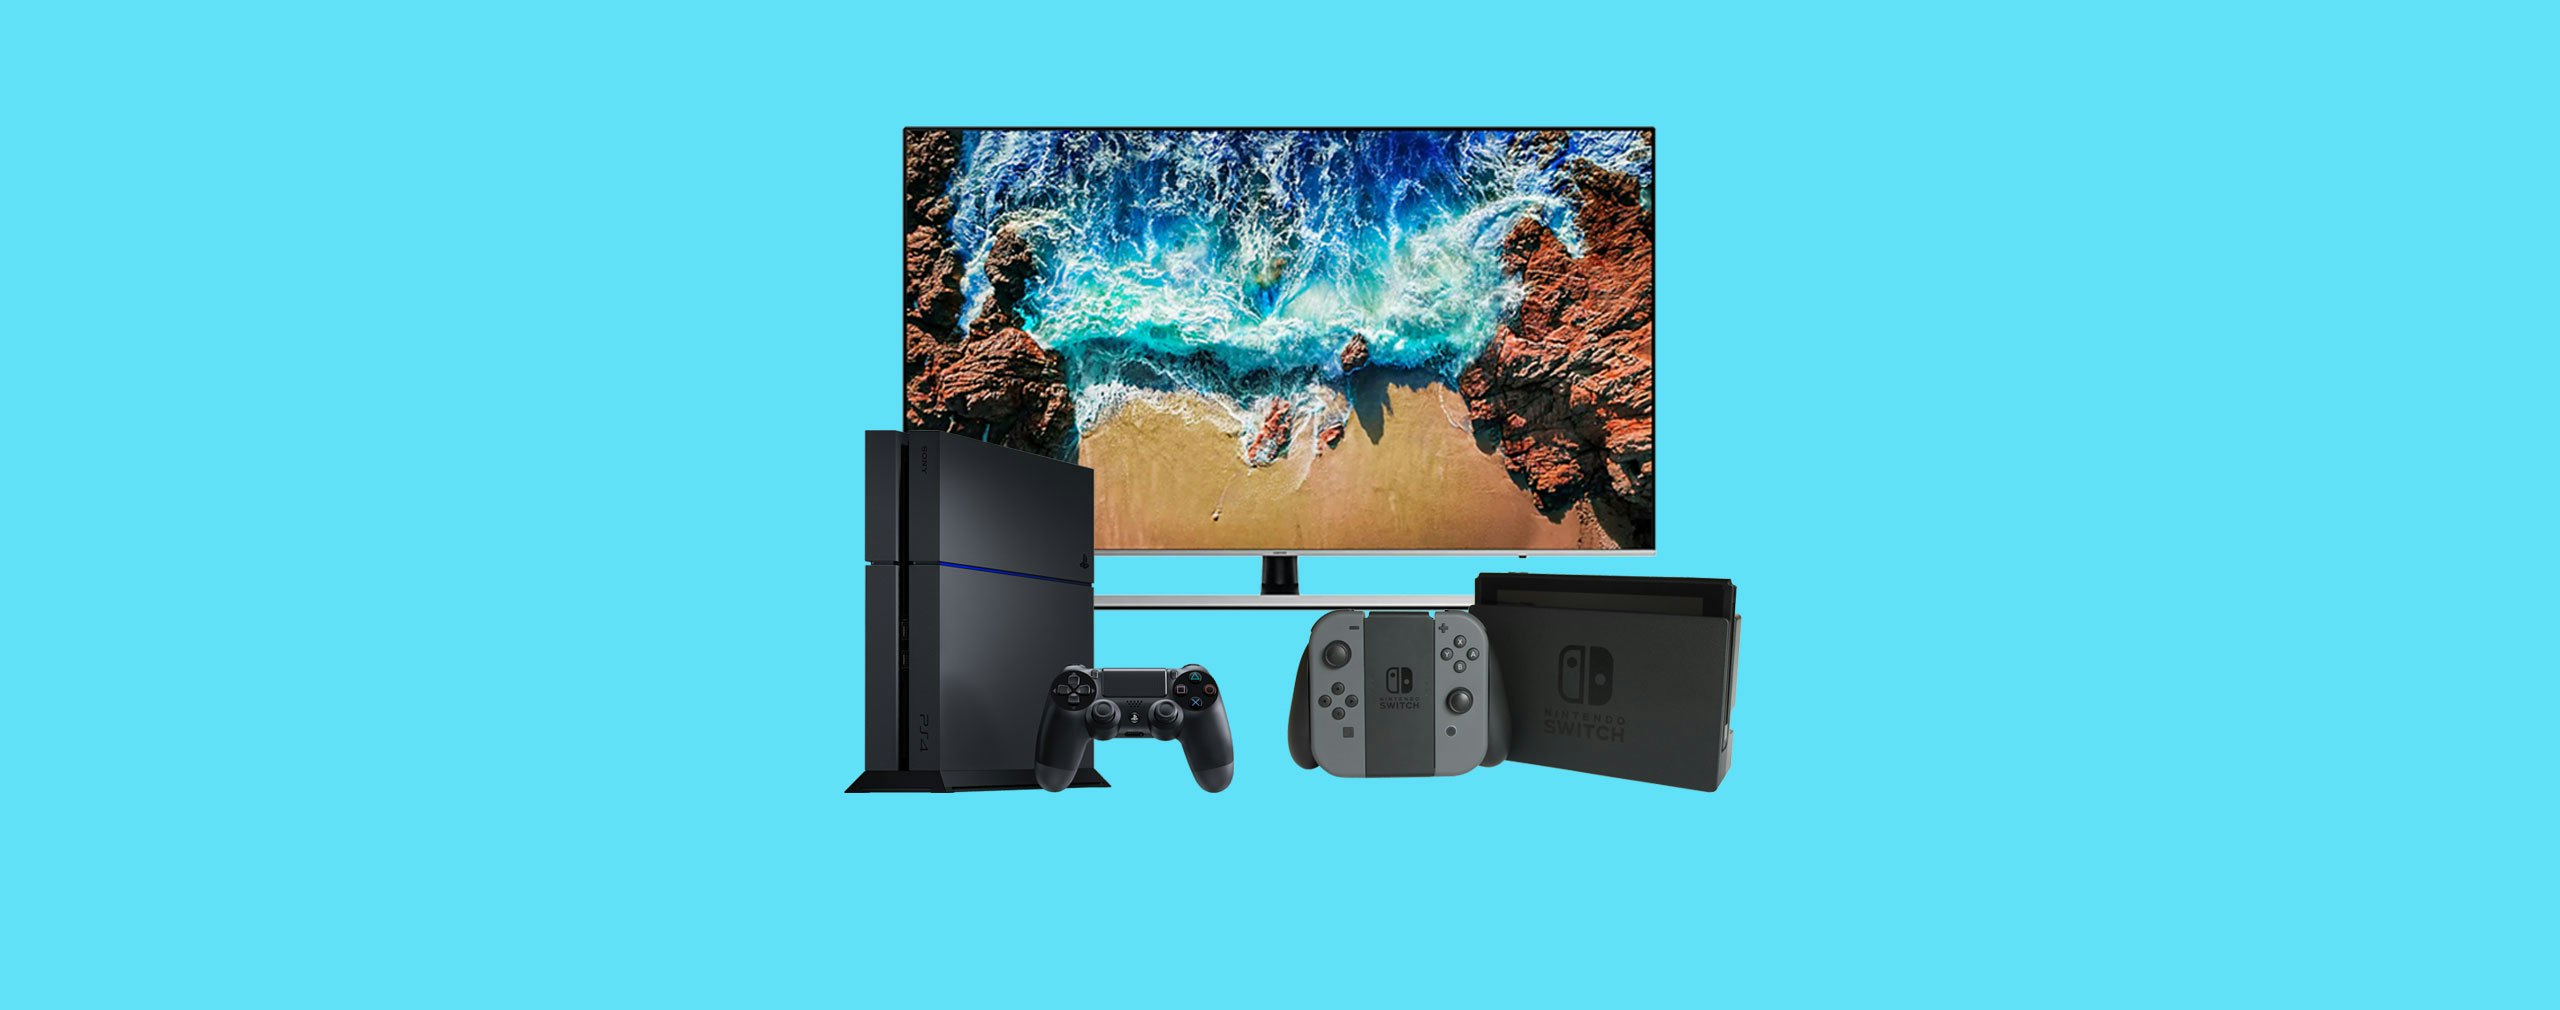 prime day video game deals 2019